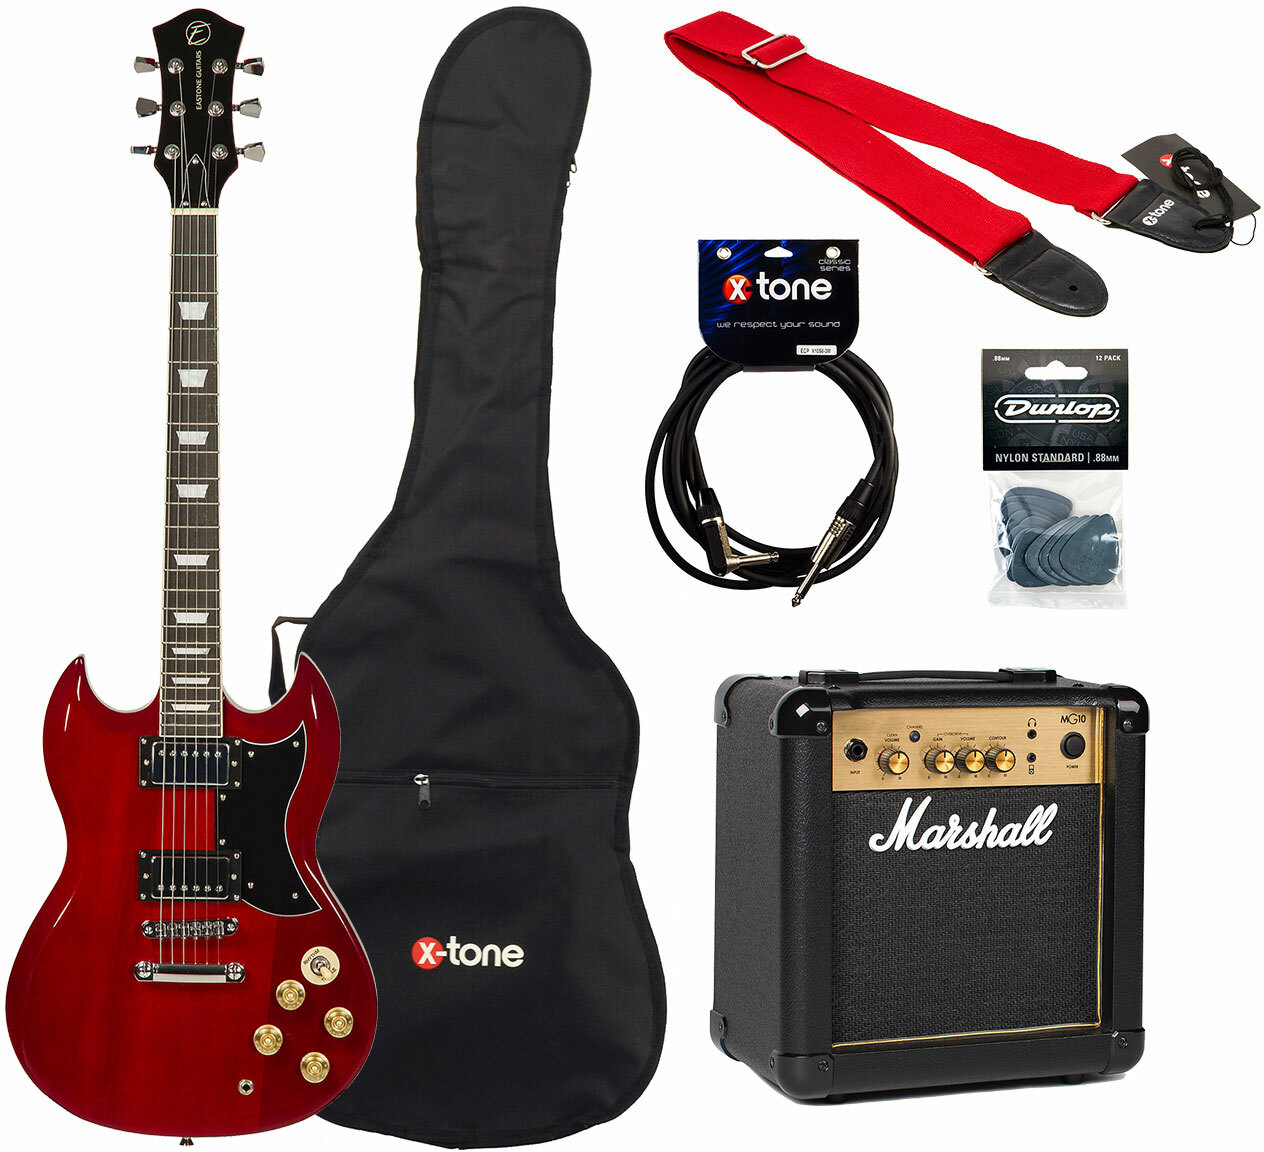 Eastone Sdc70 +marshall Mg10g Gold +cable +housse +courroie +mediators - Red - Electric guitar set - Main picture